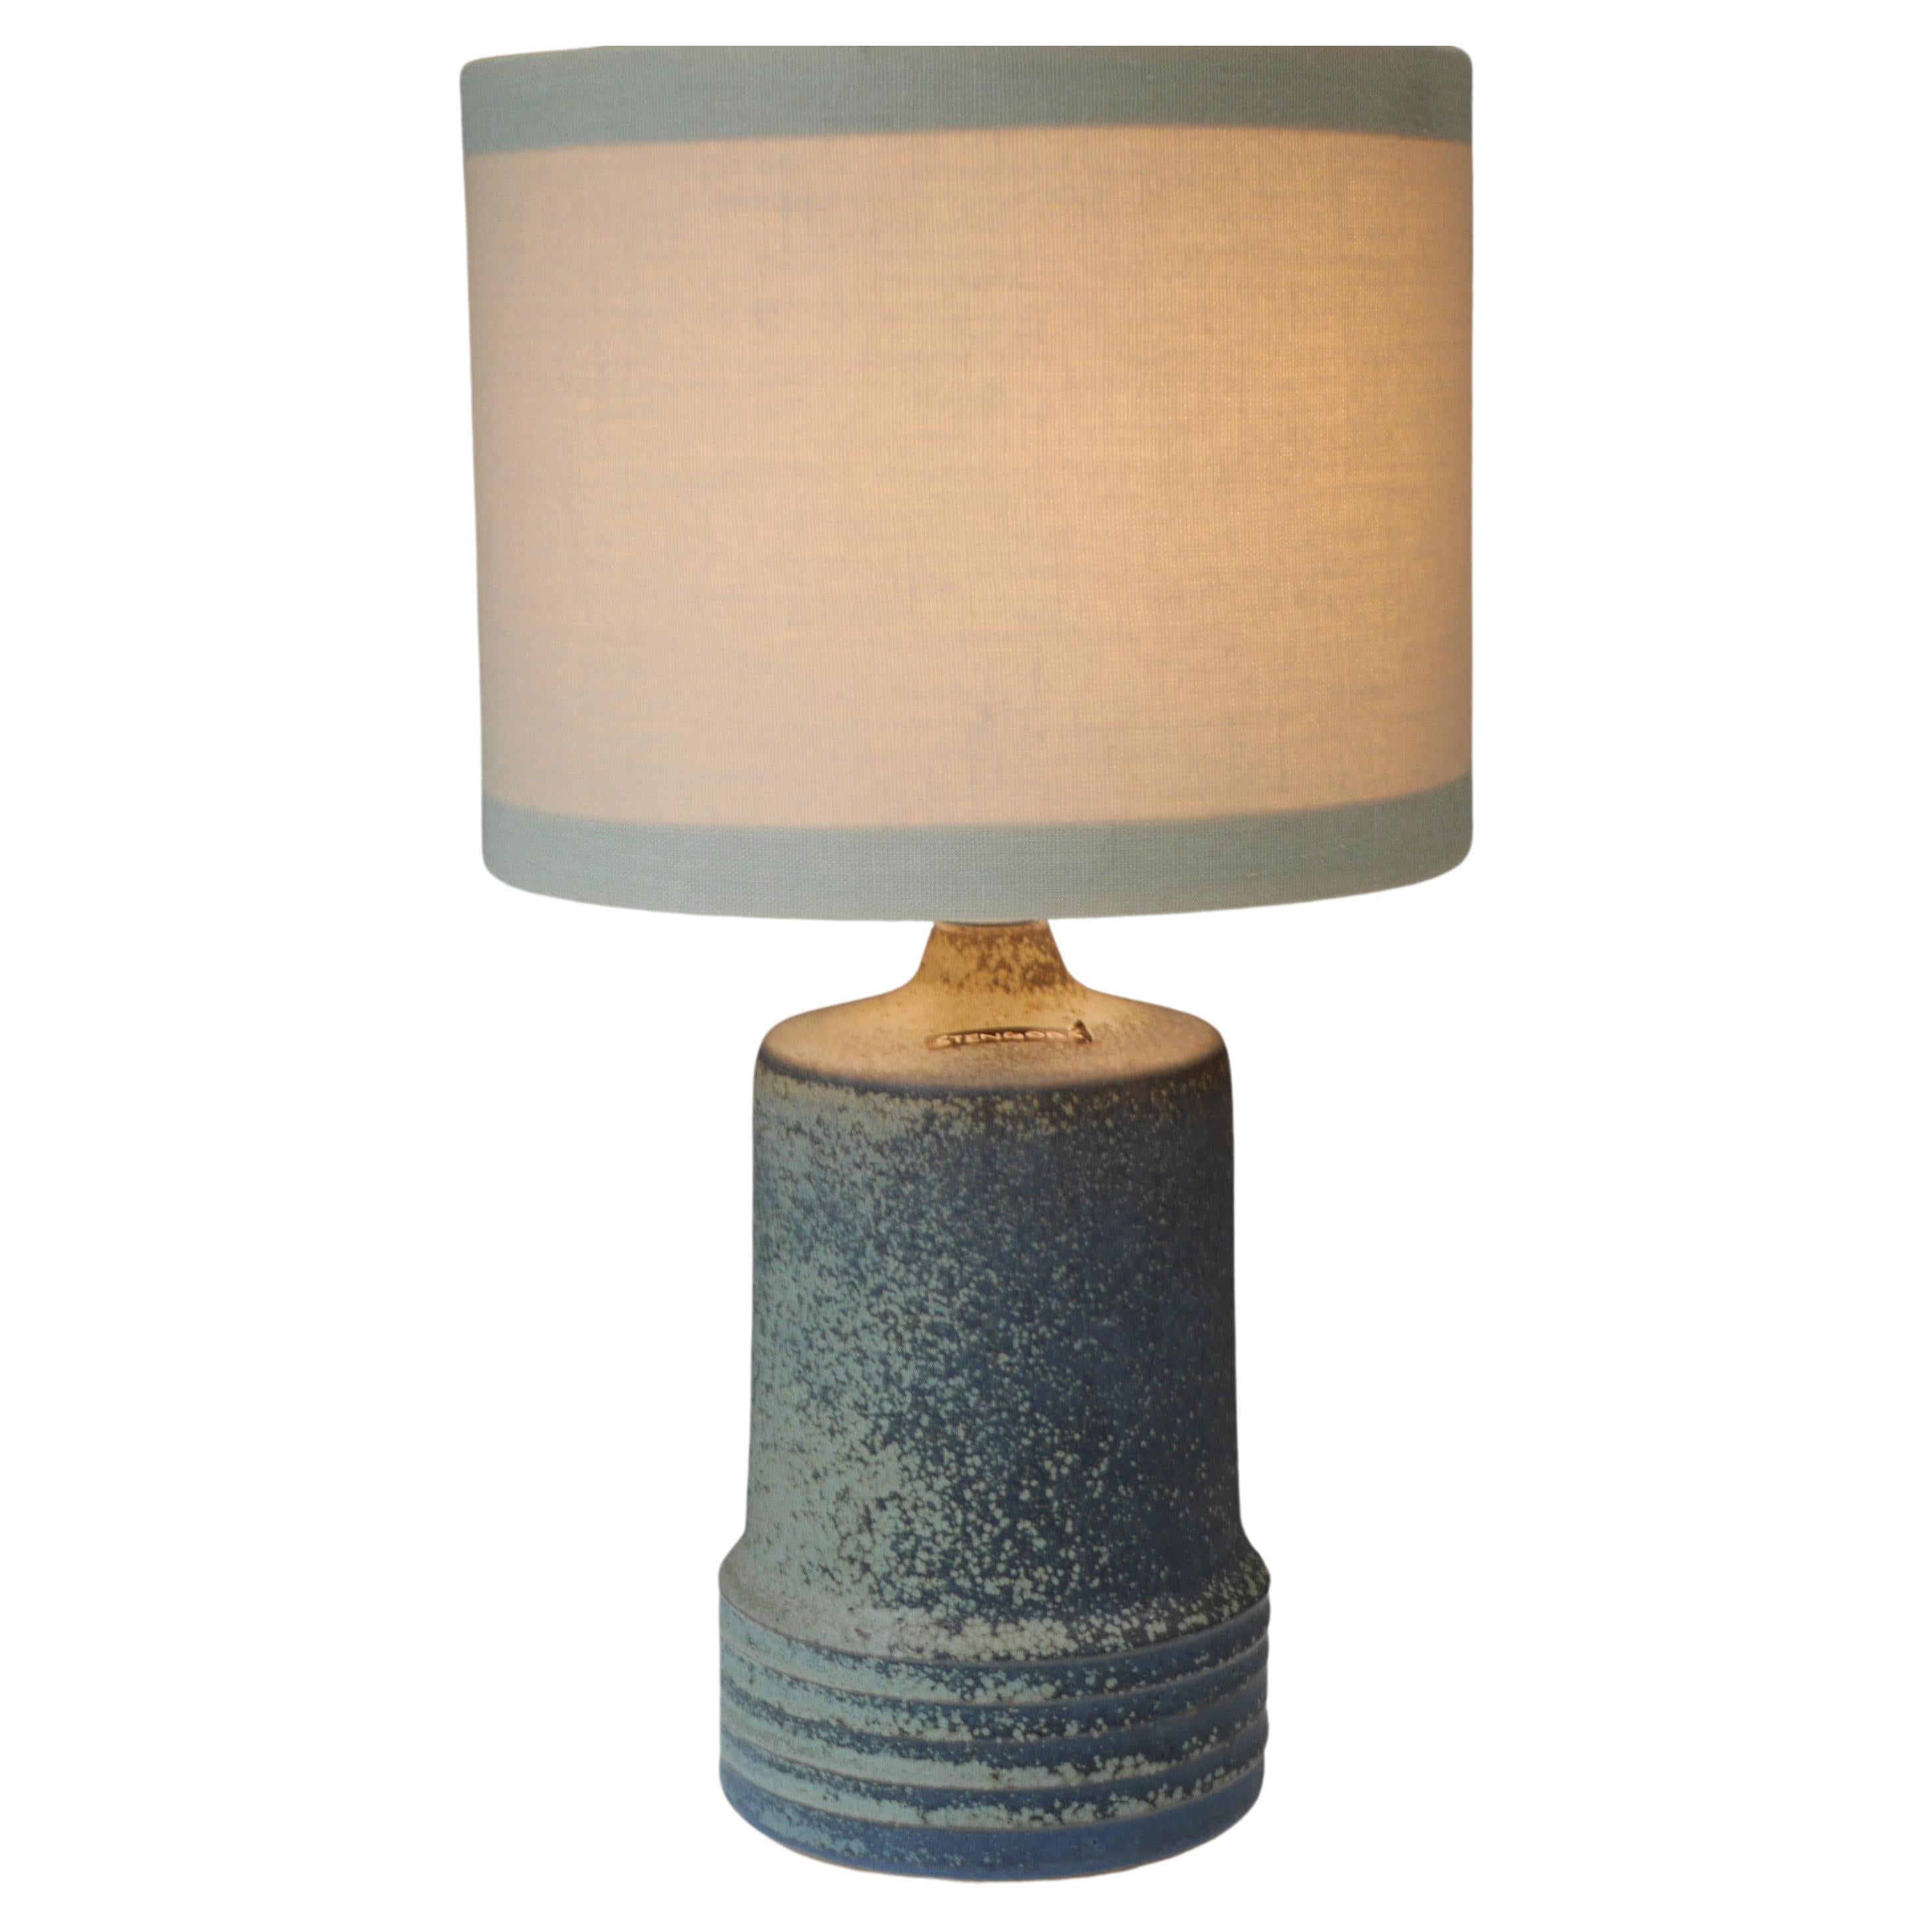 Mid-century modern pottery table lamp made by Rolf Palm, Sweden. 